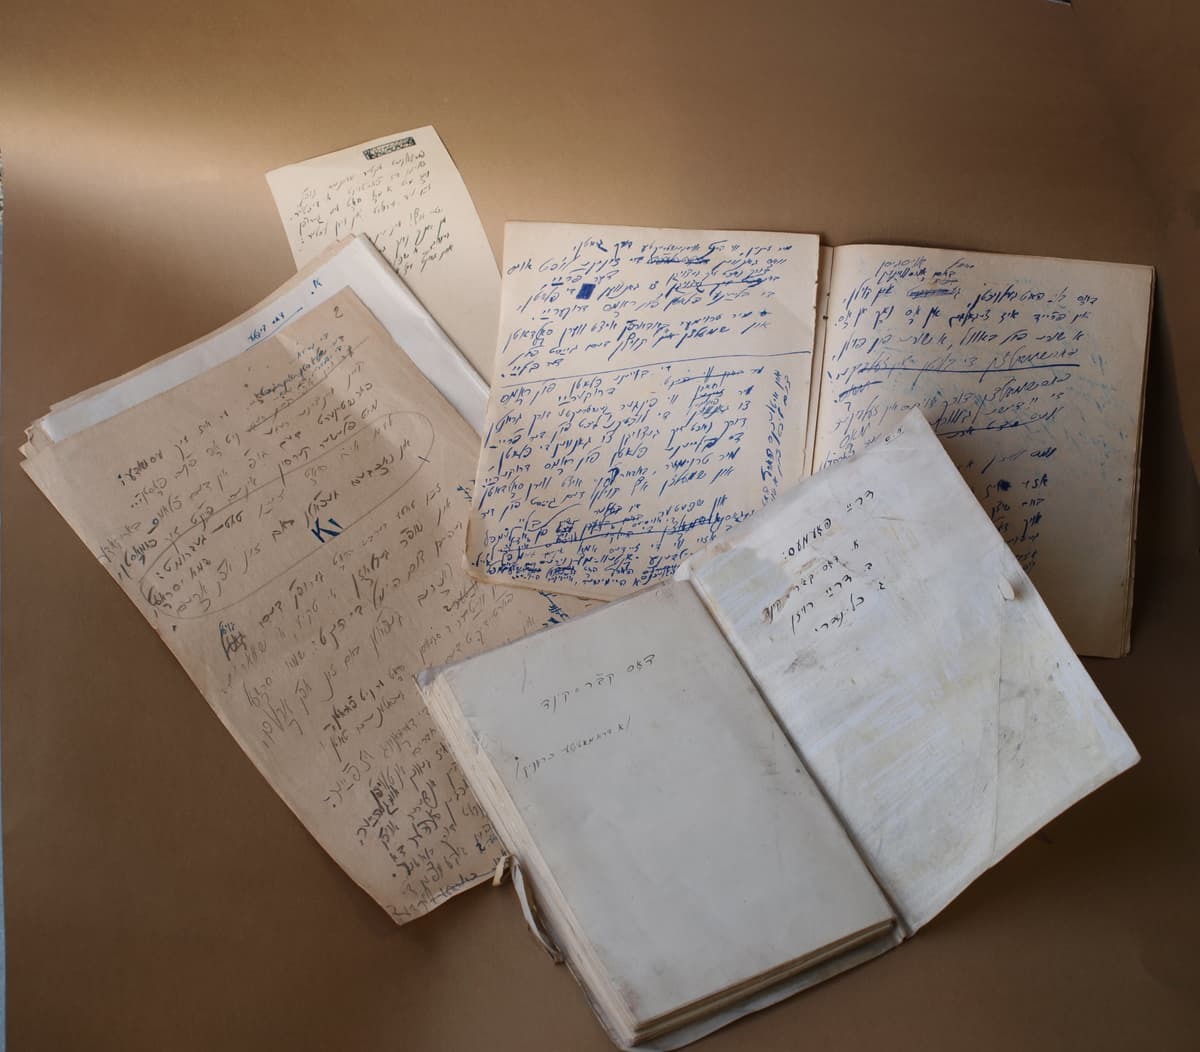 Some of Avrom Sutzkever‘s poems written in the Vilna ghetto and their drafts